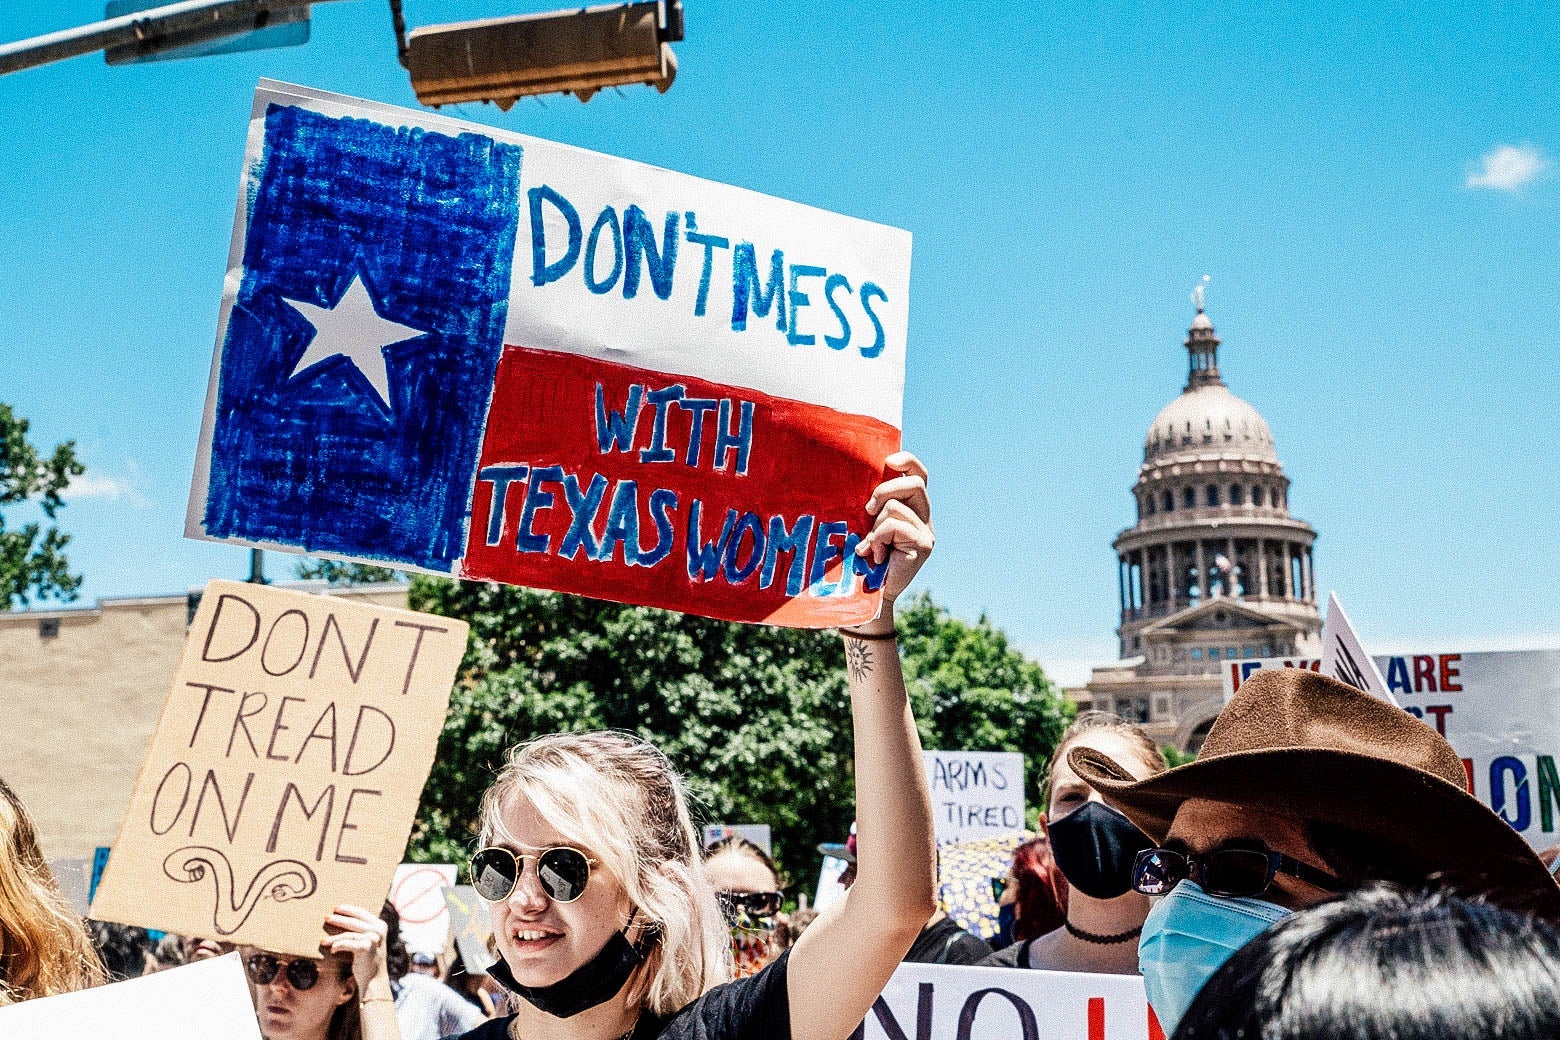 Protesters march in front of the Texas State Capitol holding up signs that say "Don't mess with Texas women" and "Don't tread on me"